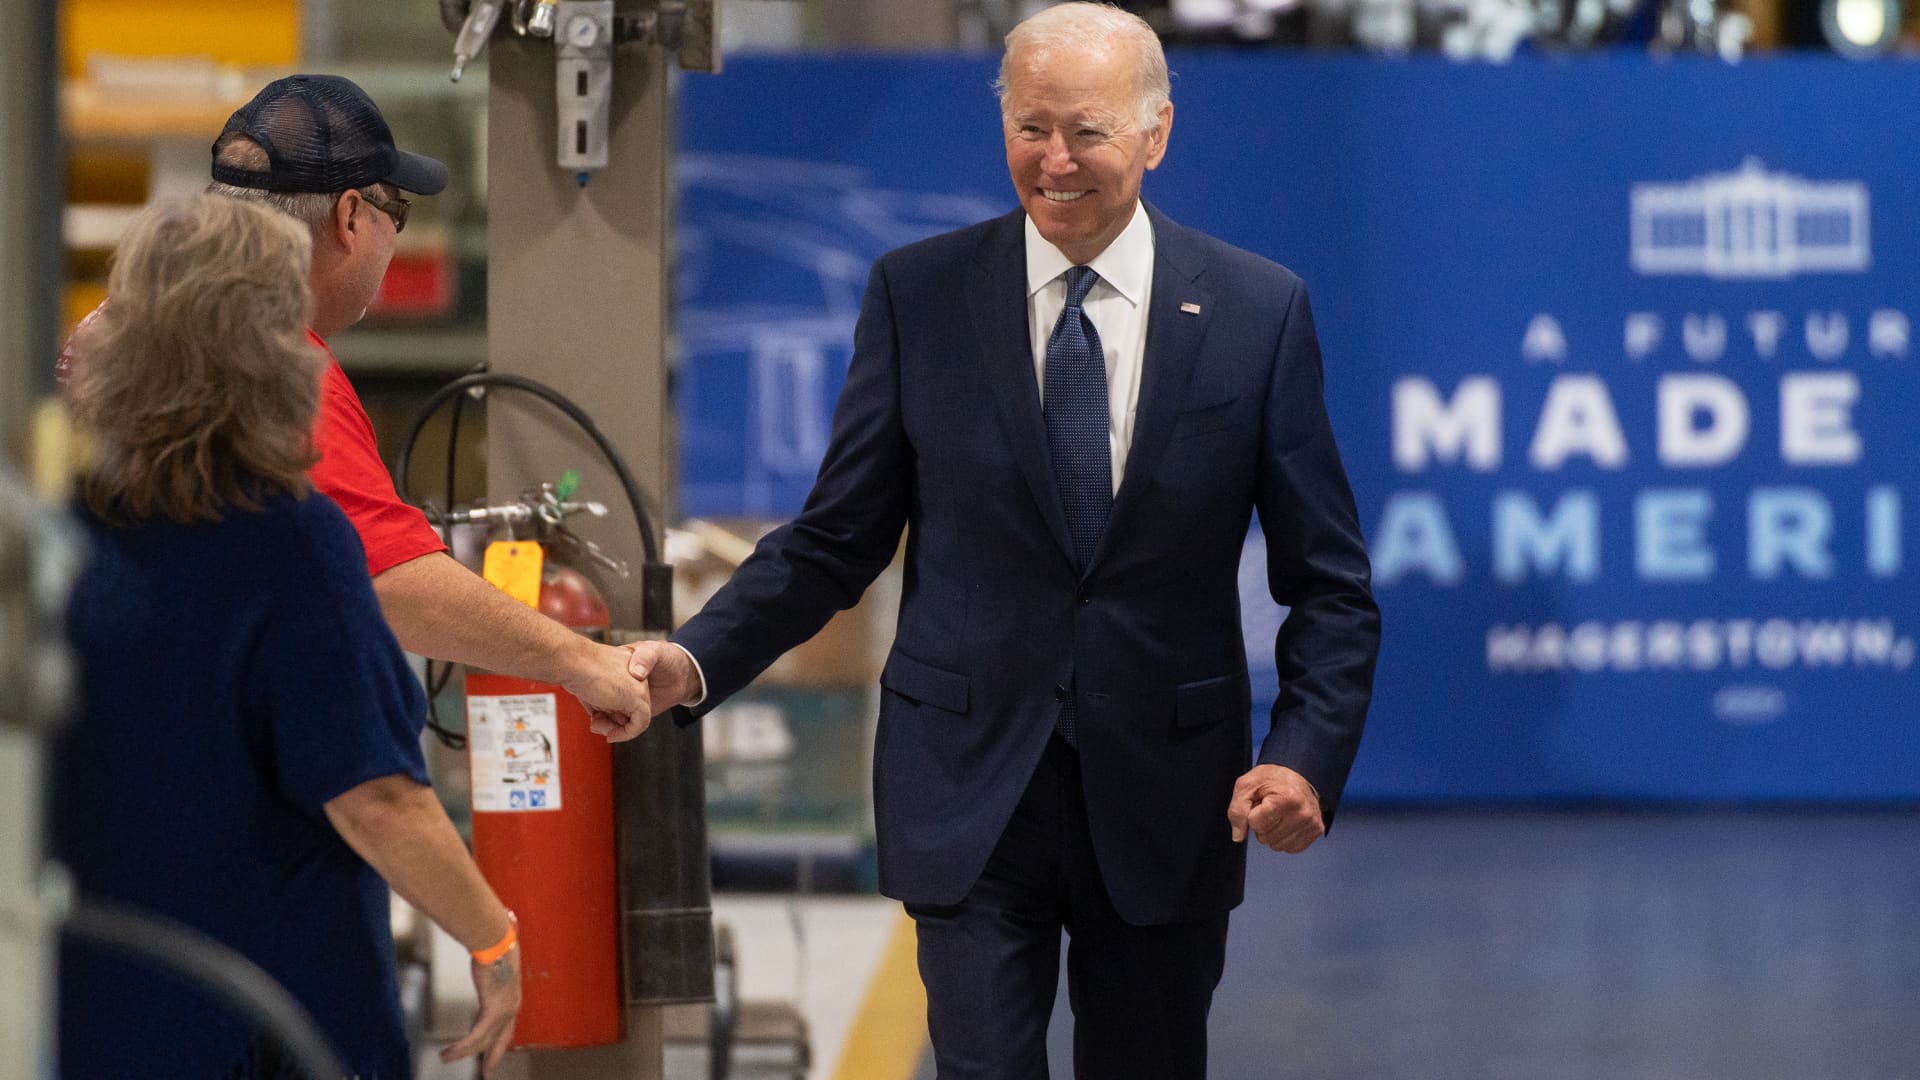 Biden says he doesn't think there will be an economic recession